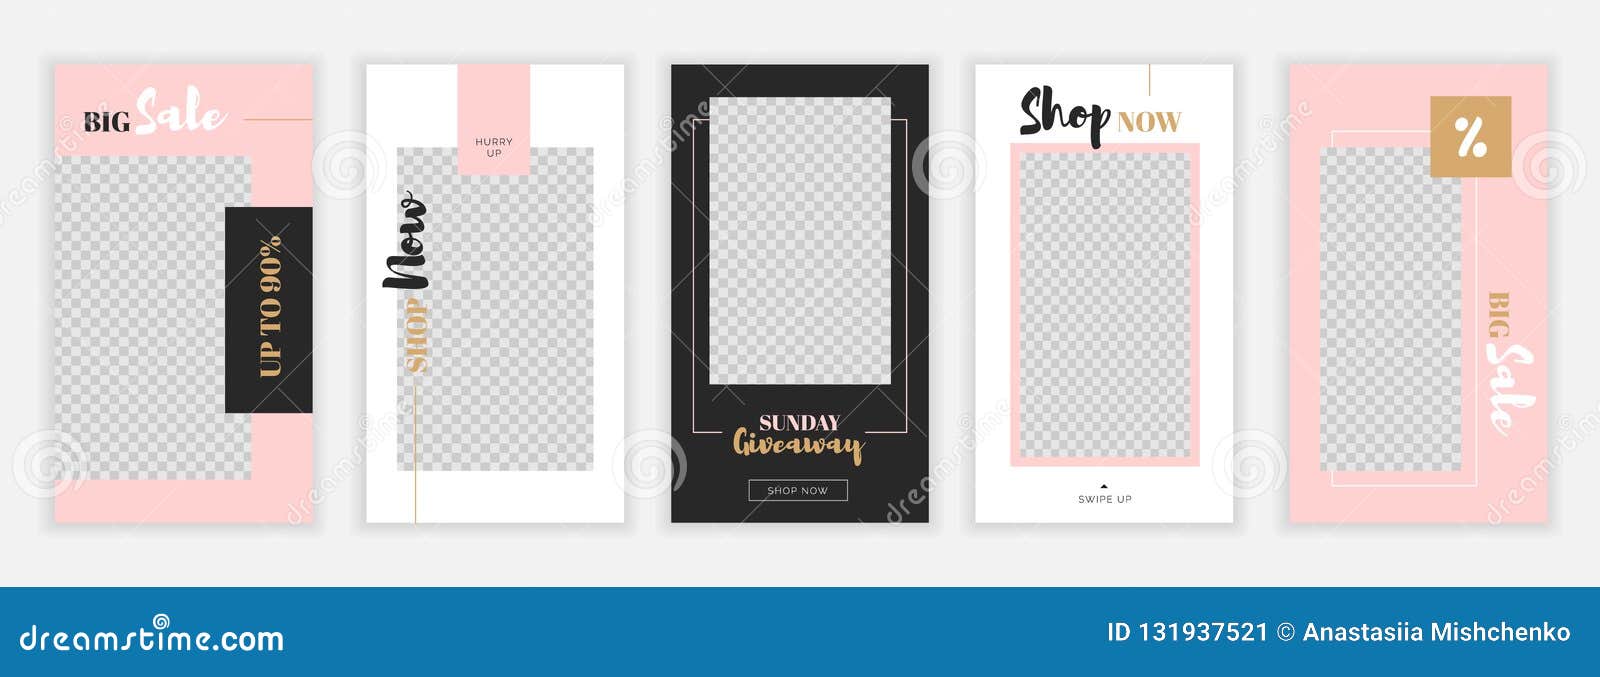 modern flat instagram stories template for blog and sales web online shopping banner concept - instagram online shopping